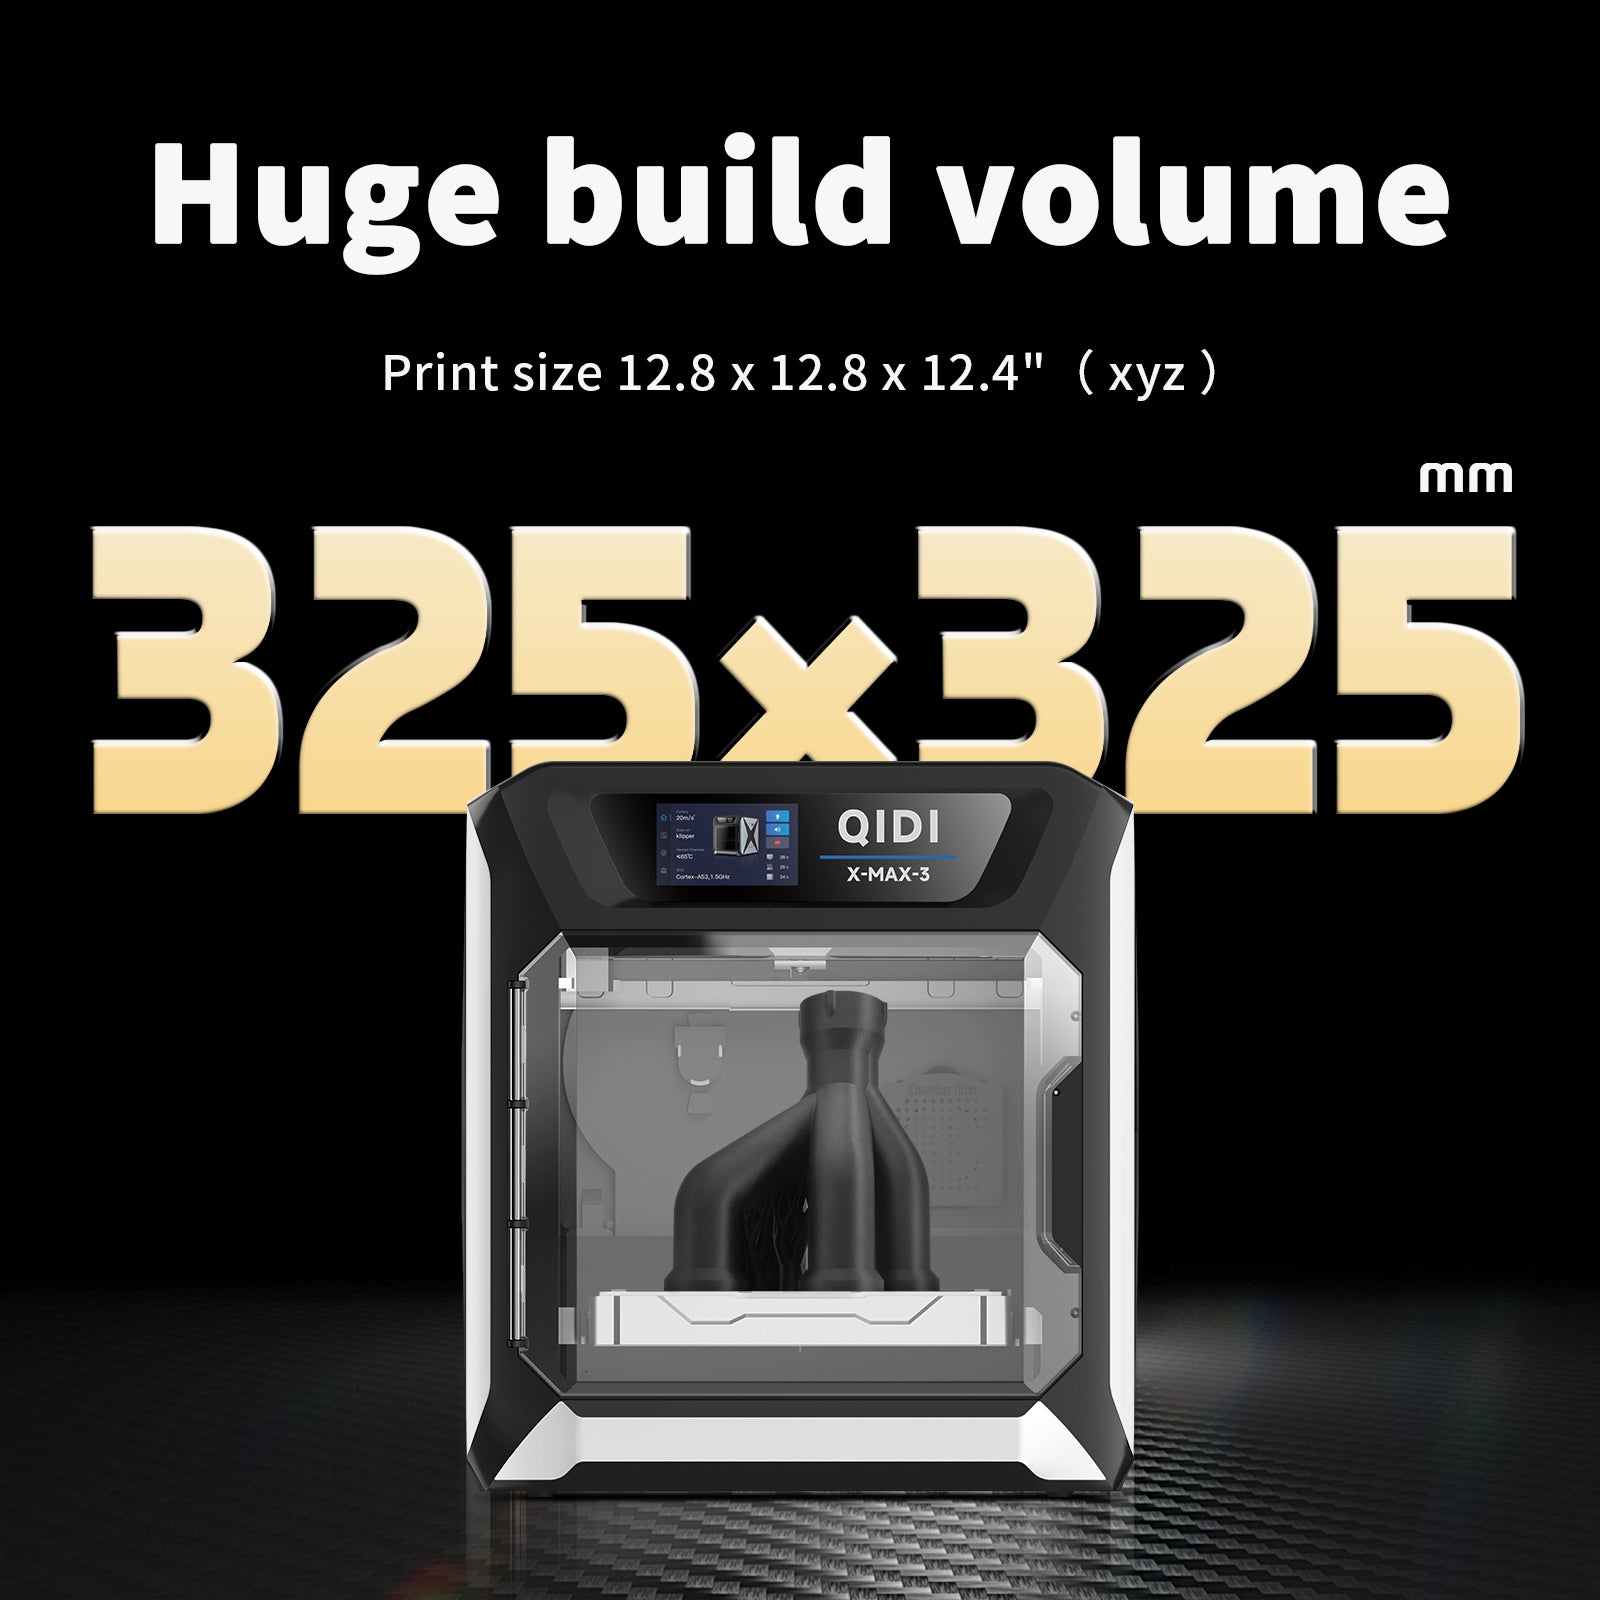 A 3D printer with a large build volume,325x325mm, capable of printing objects in three dimensions.